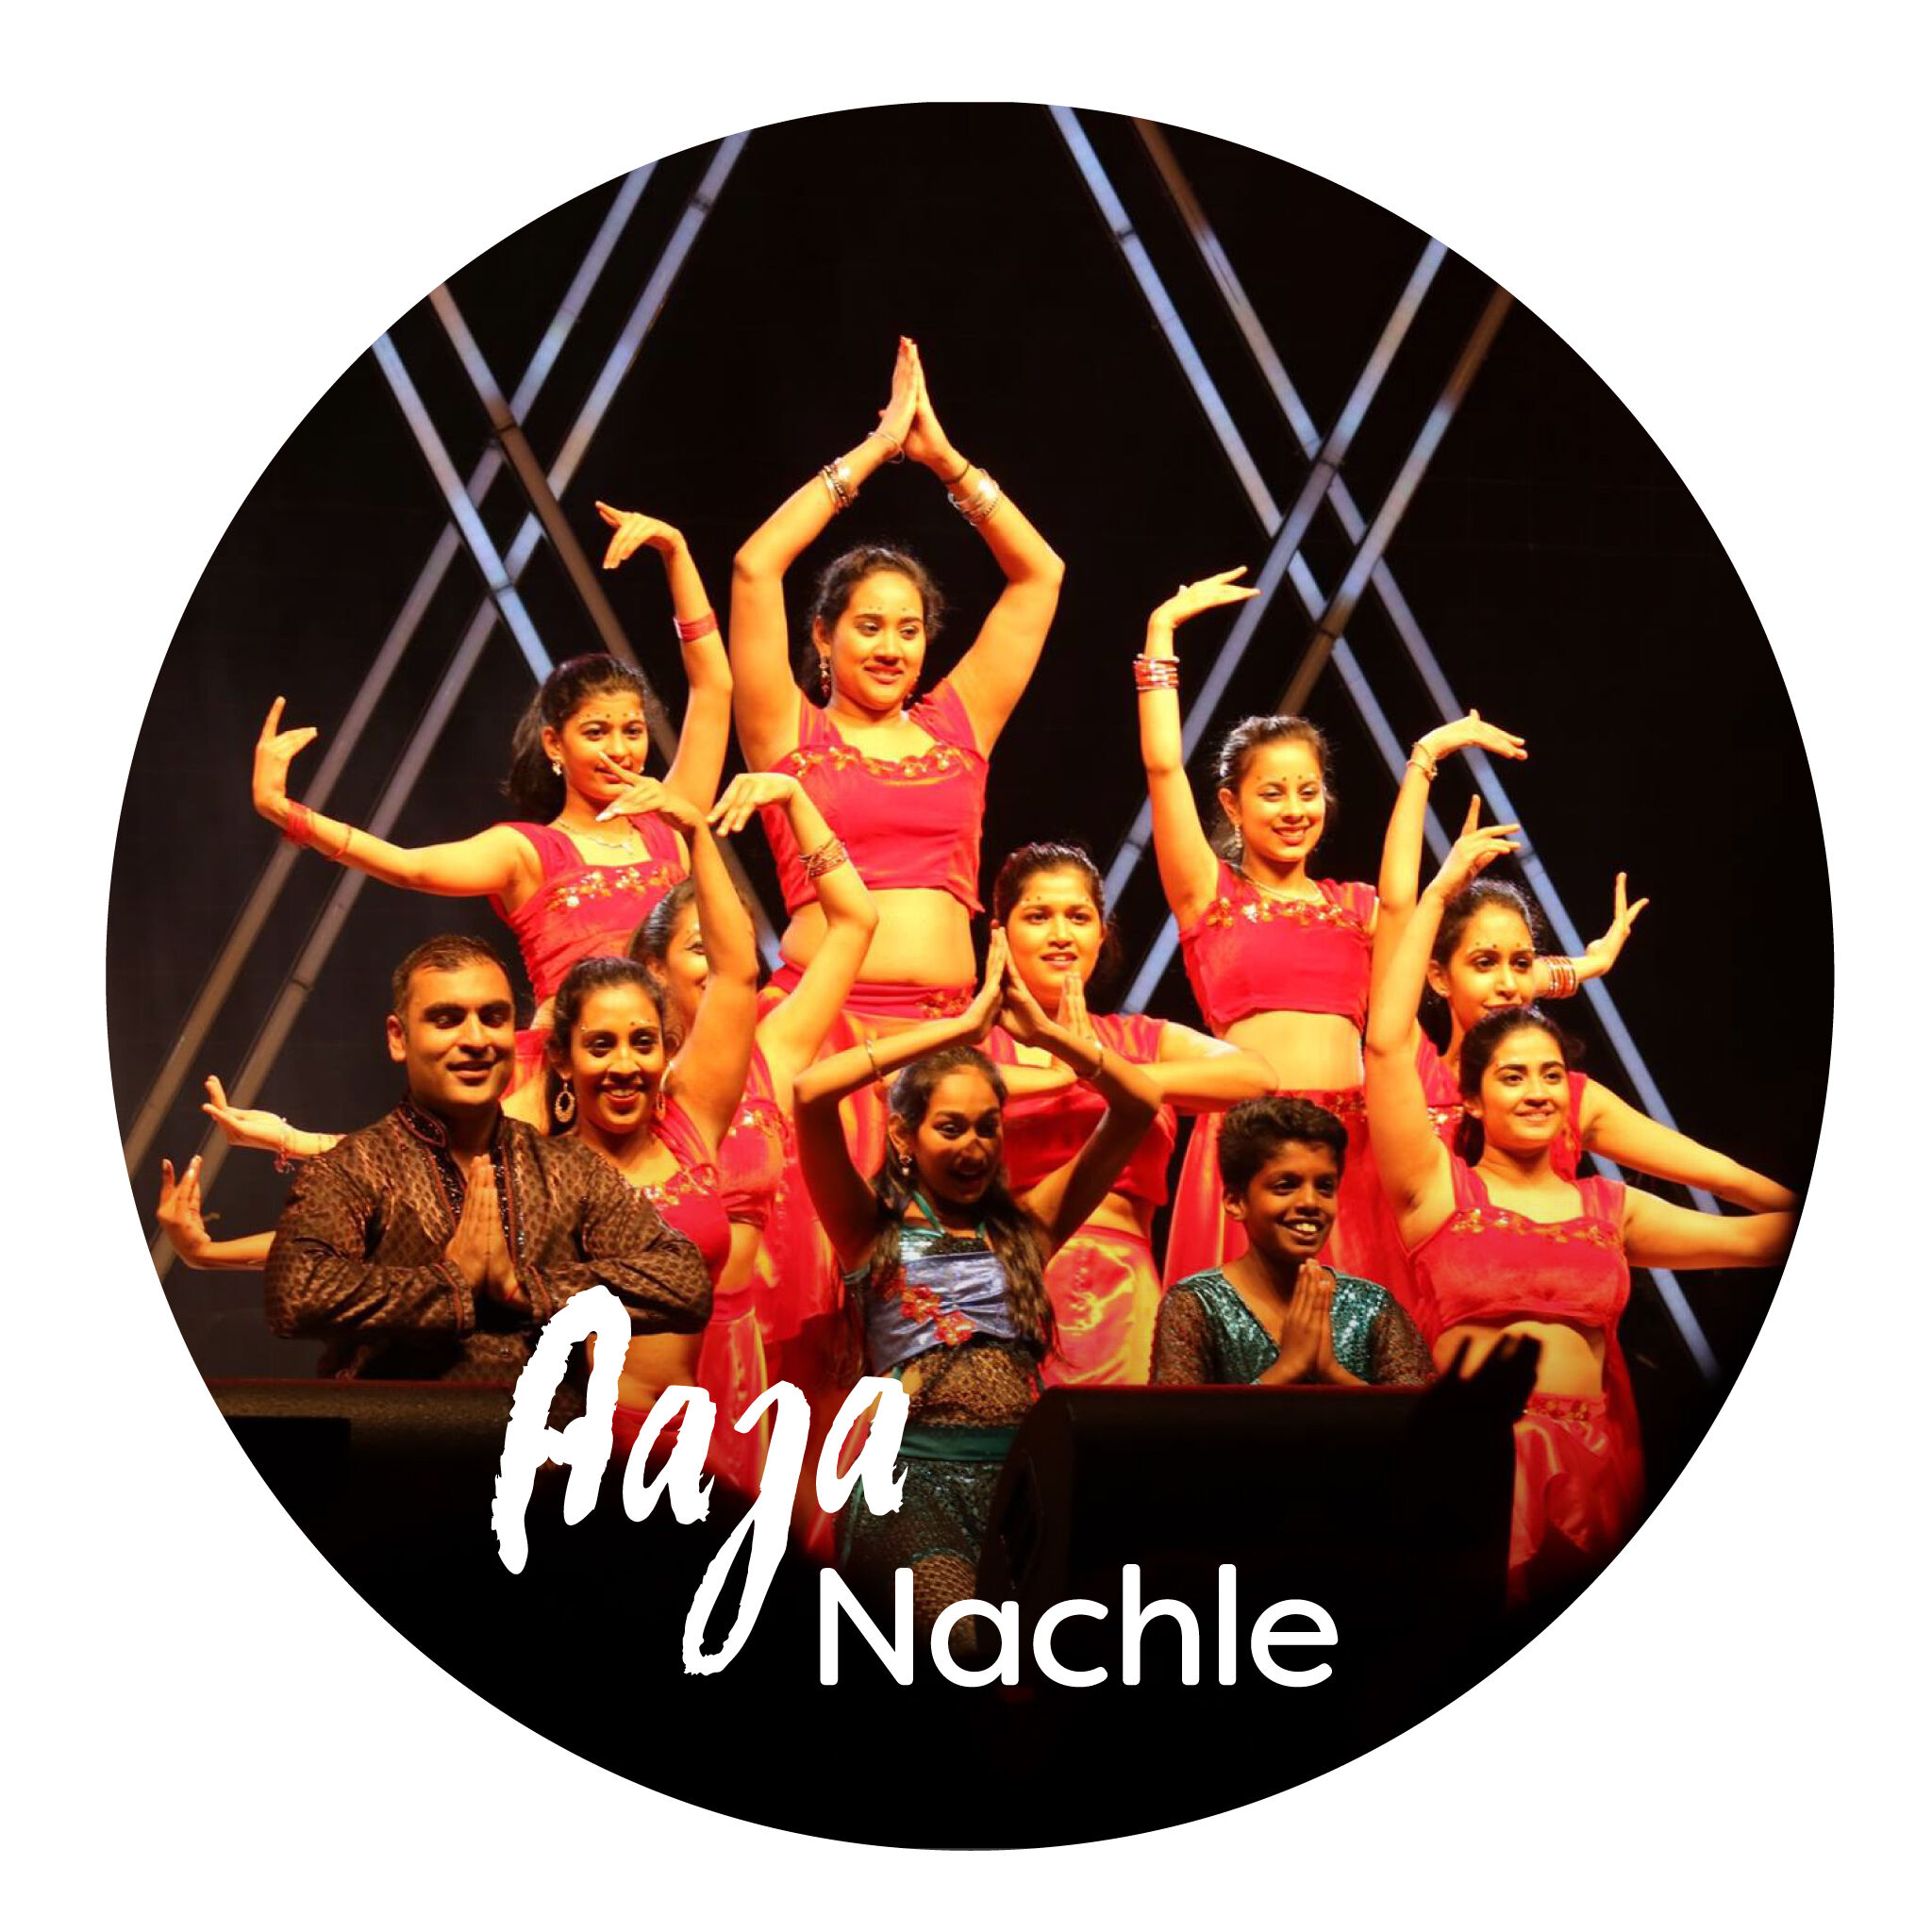 A picture of Aaja Nachle